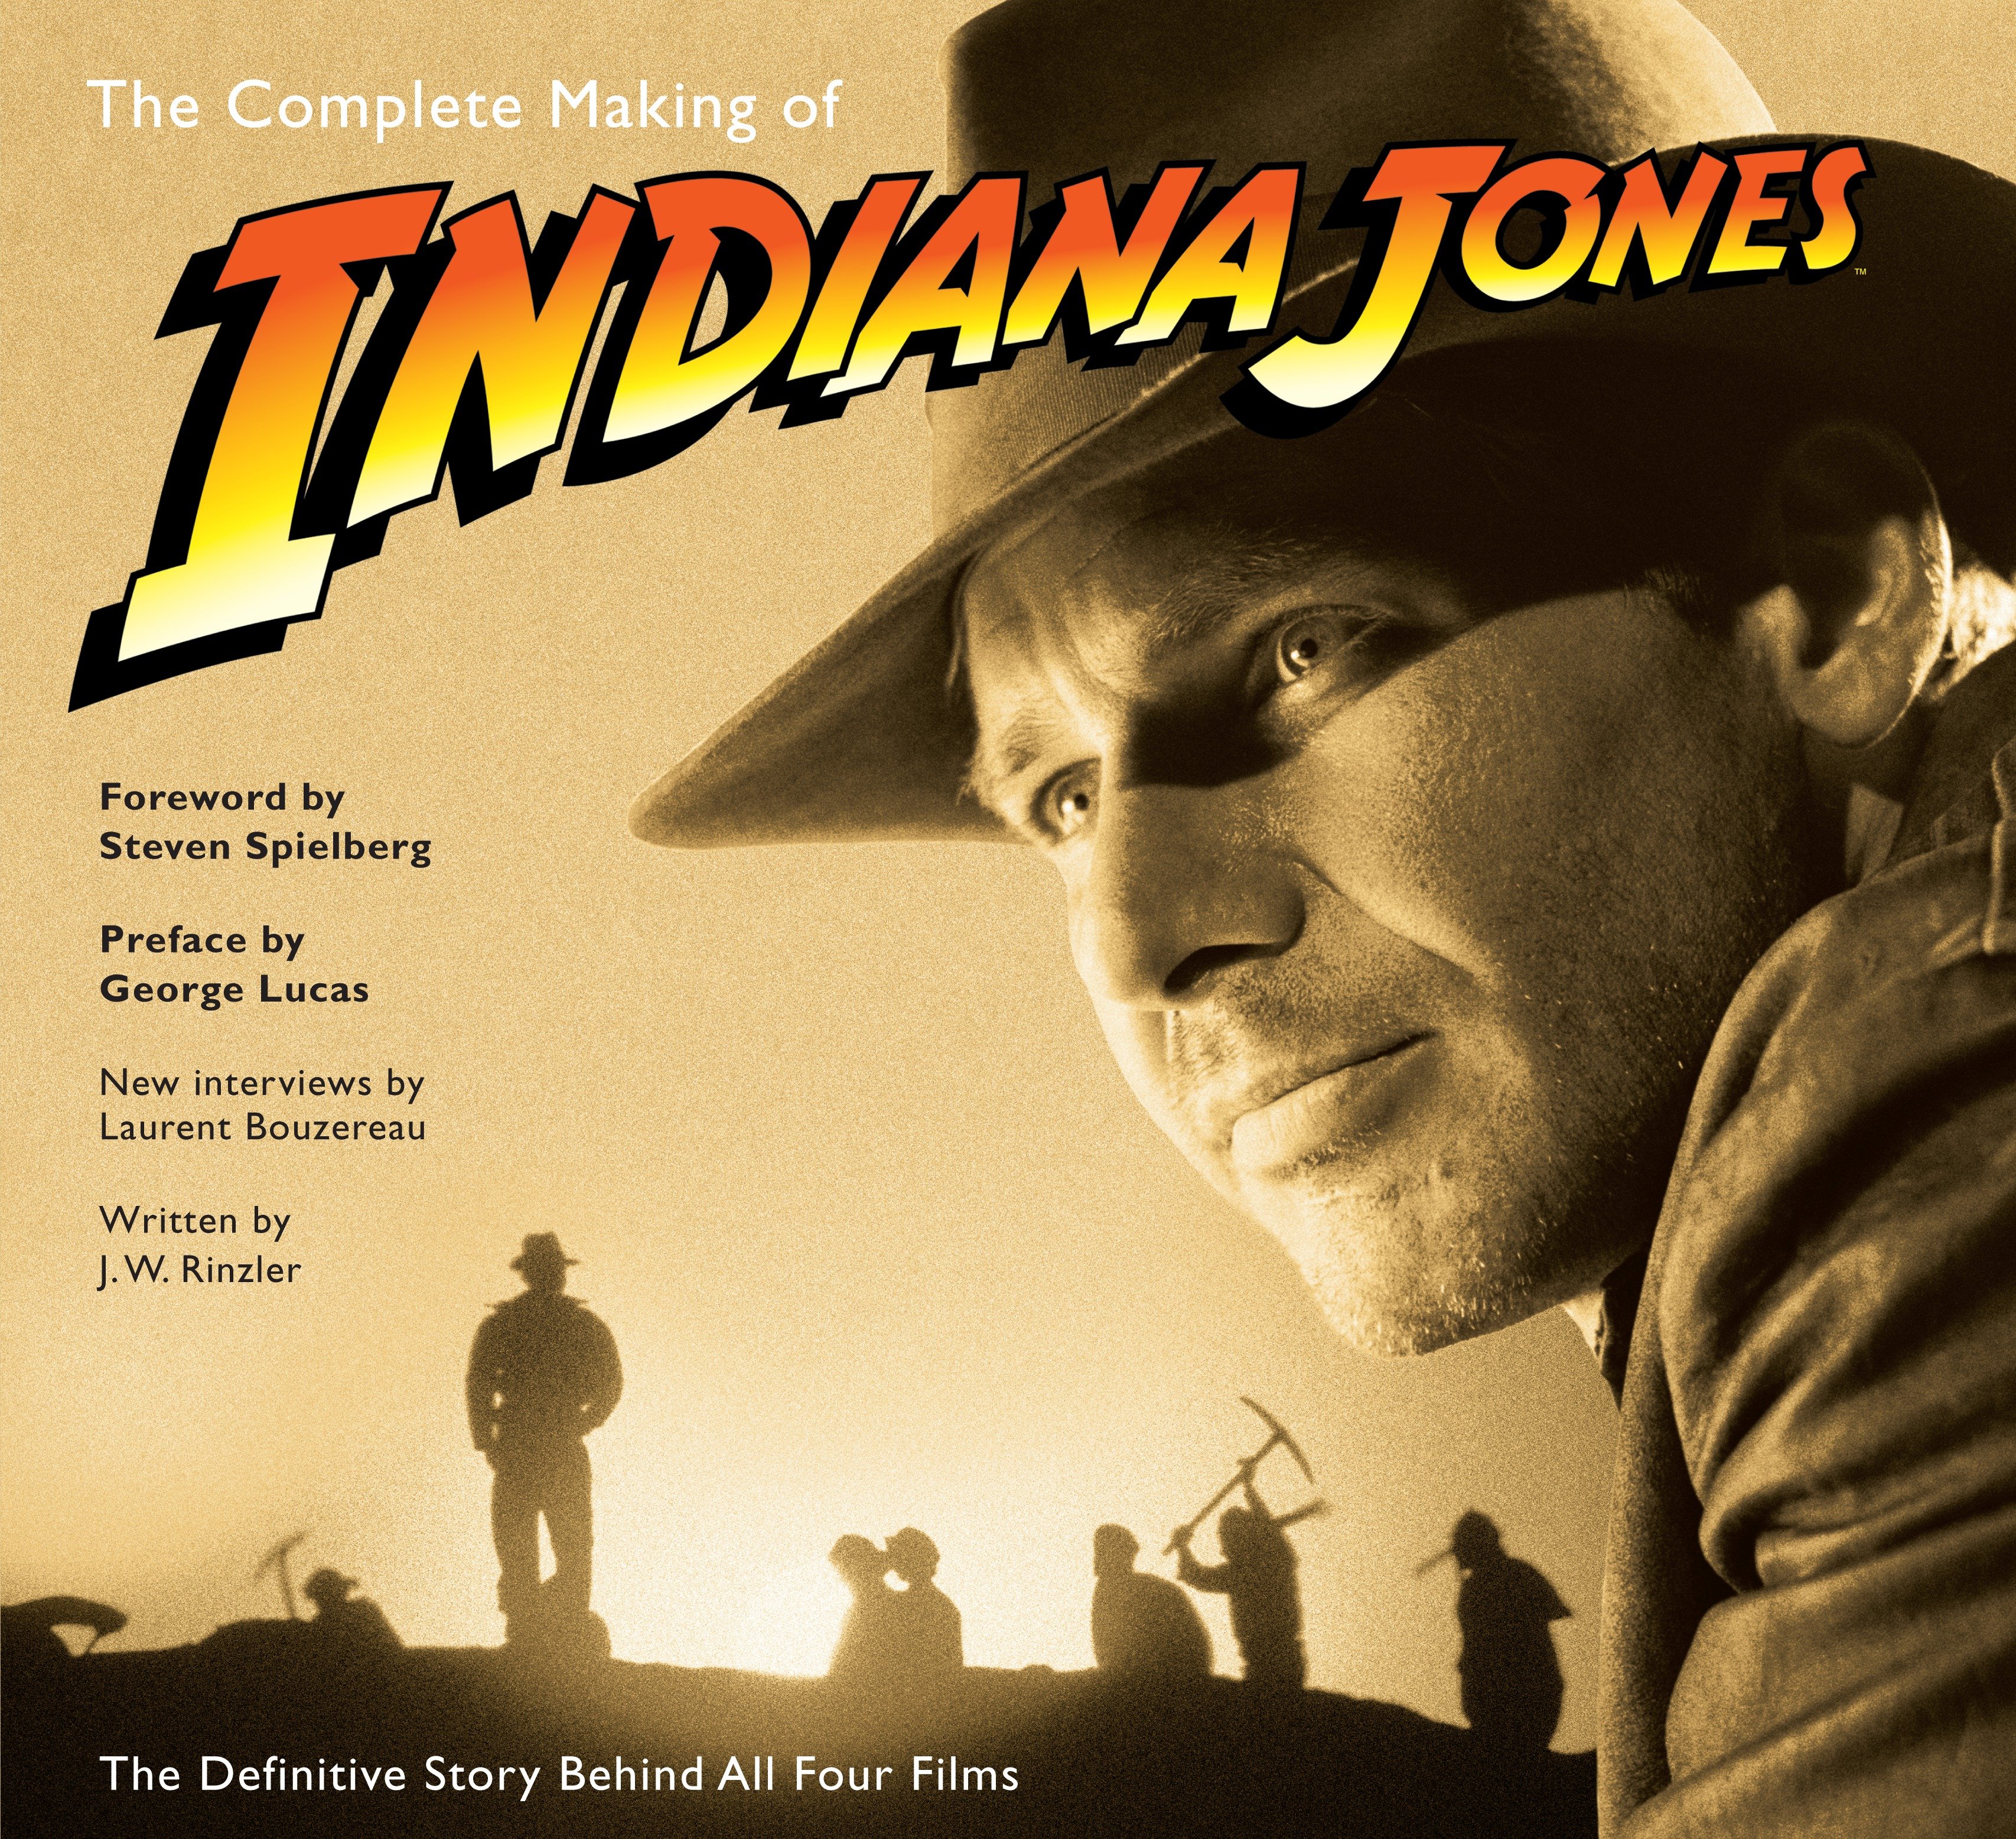 Complete Making of Indiana Jones Soft Cover